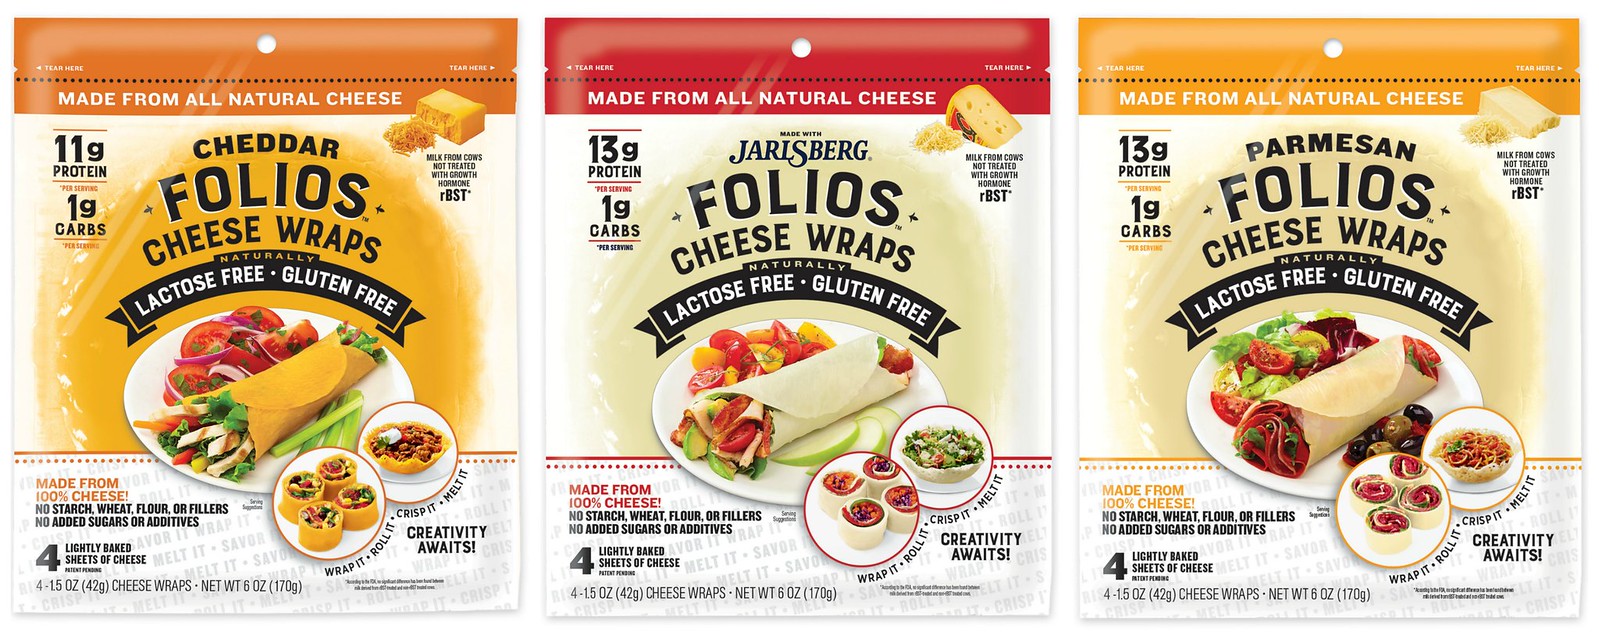 Have a Guilt Free Holiday with Cheese Folios